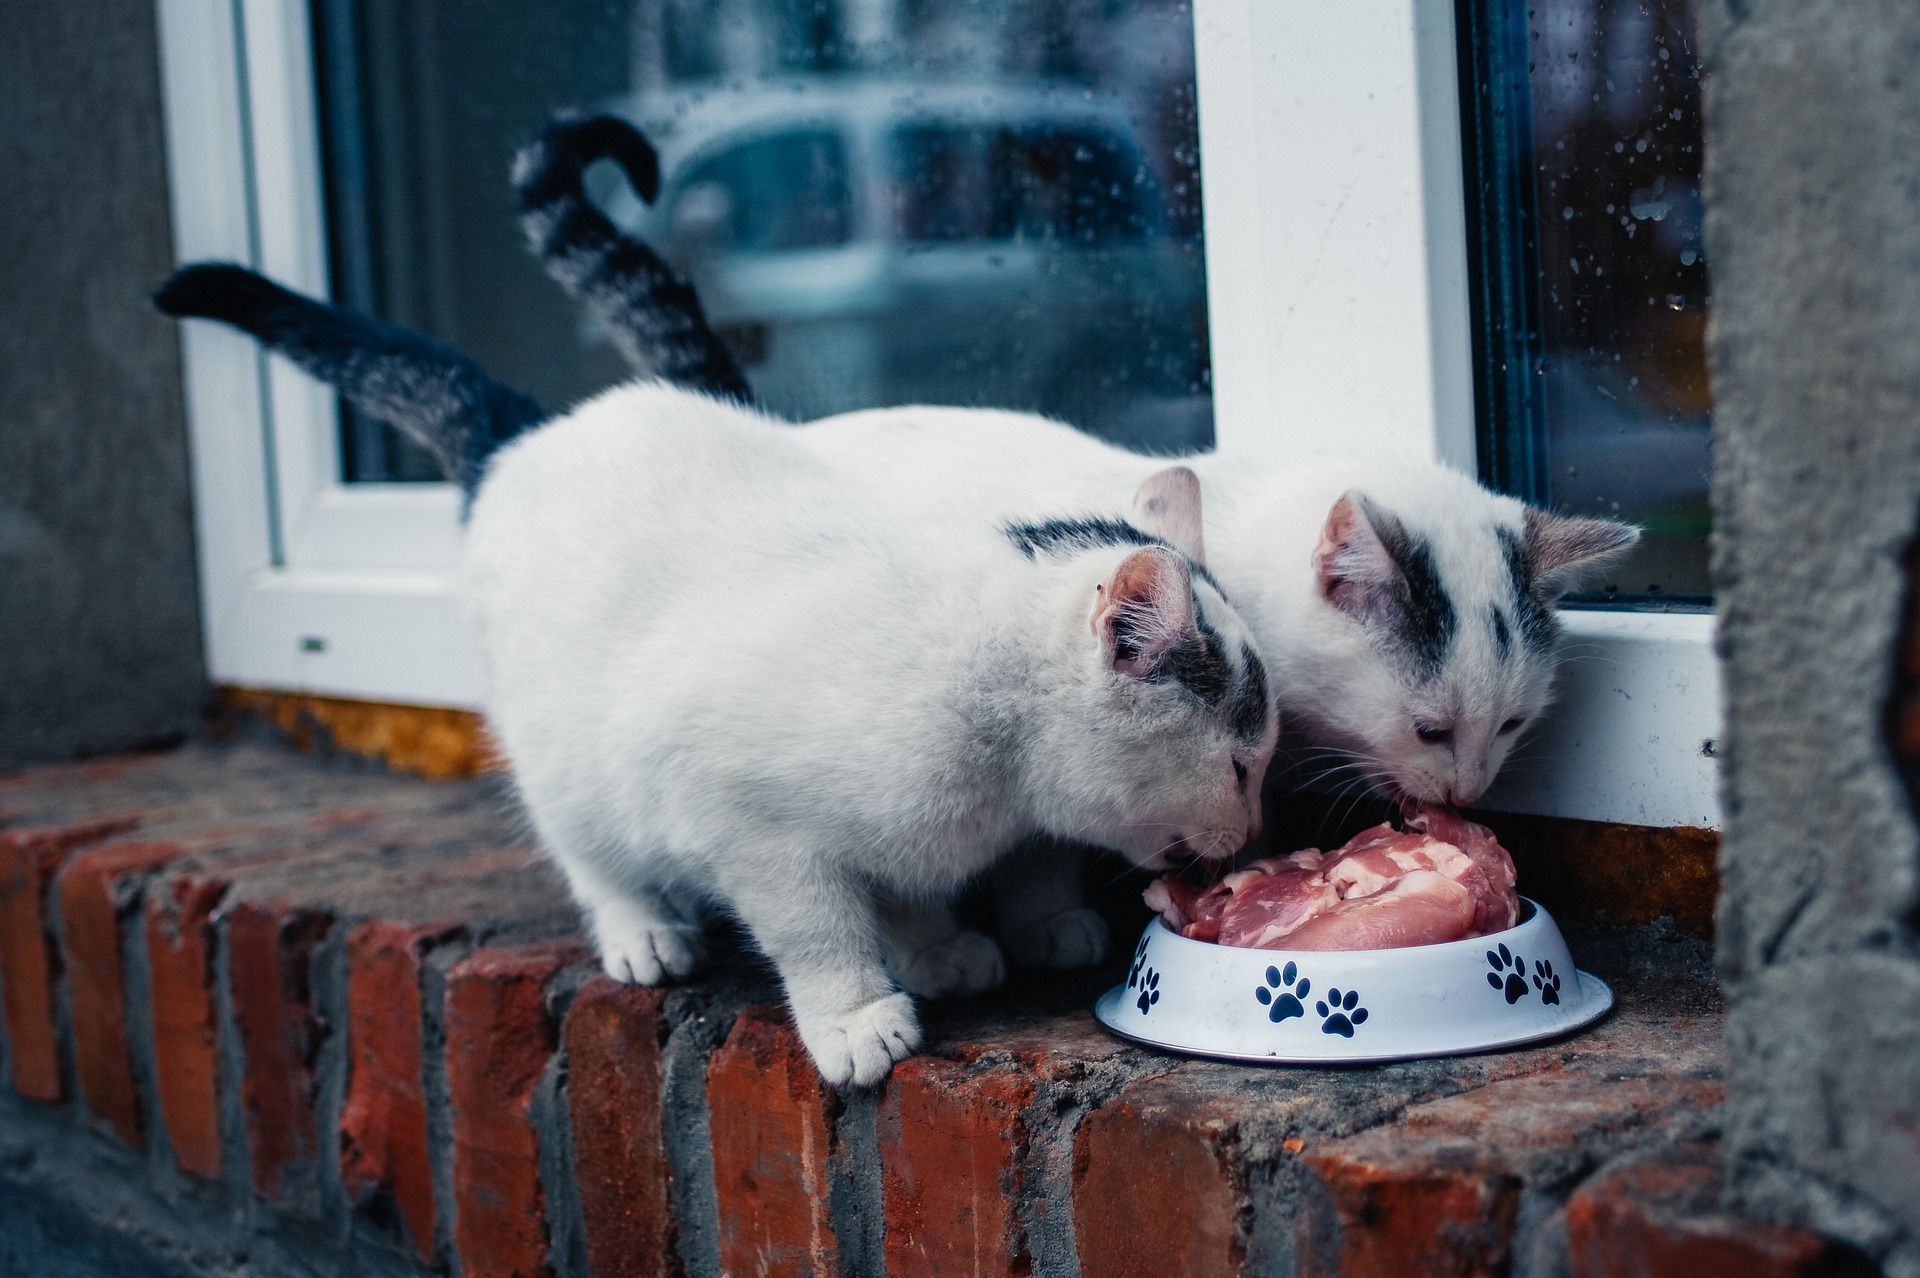 Two white cats eating meat